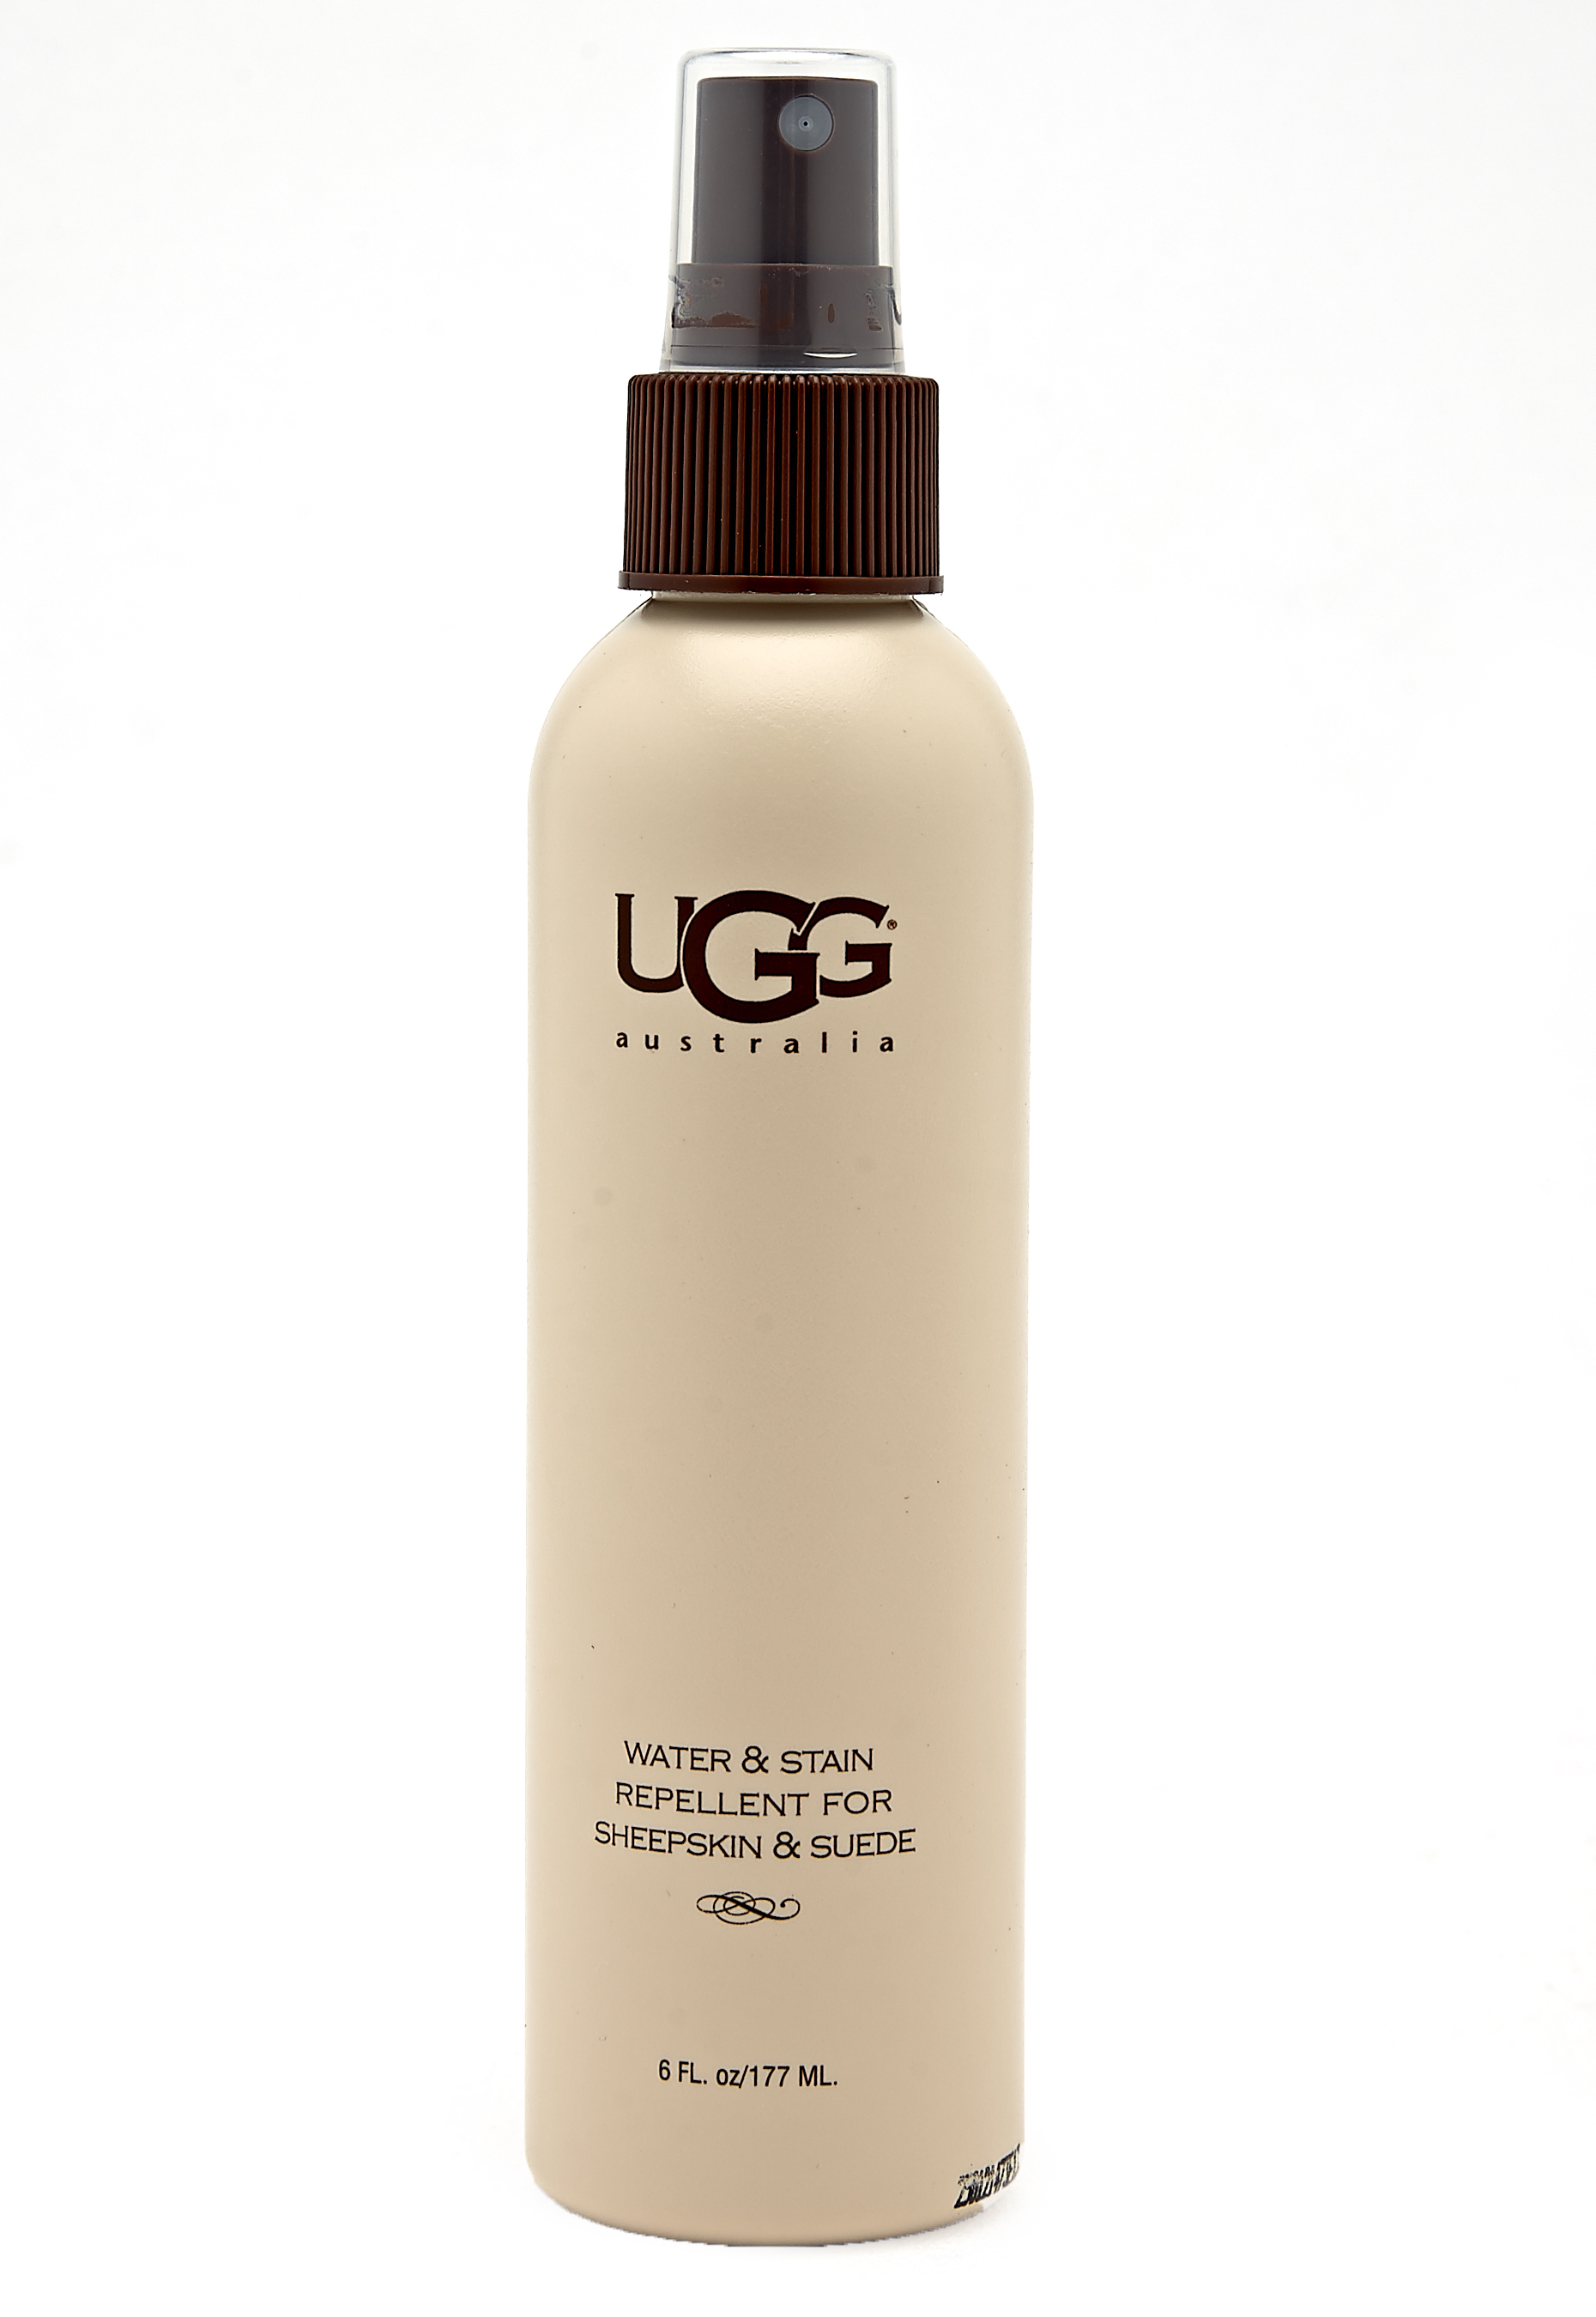 ugg water and stain repellent for sheepskin and suede